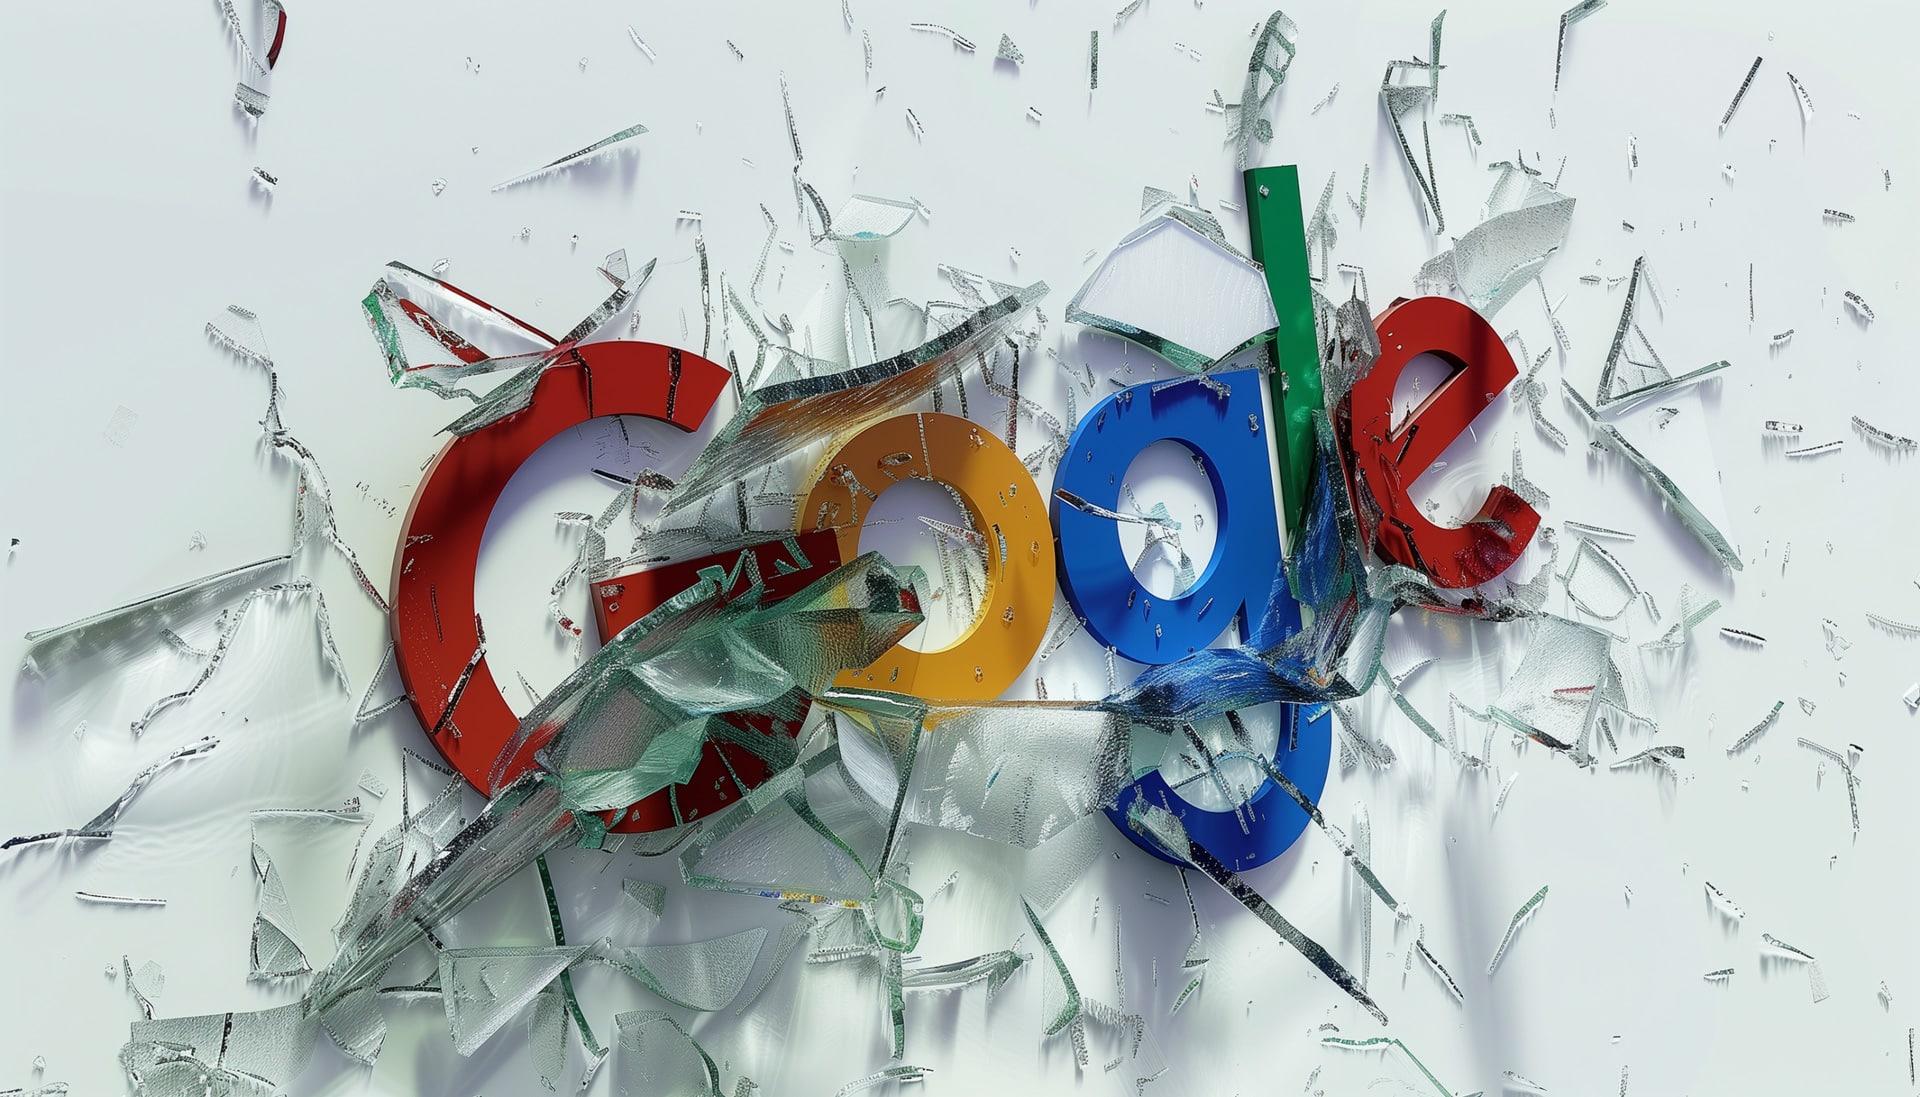 #Head of Google Search demands urgency as growth slows